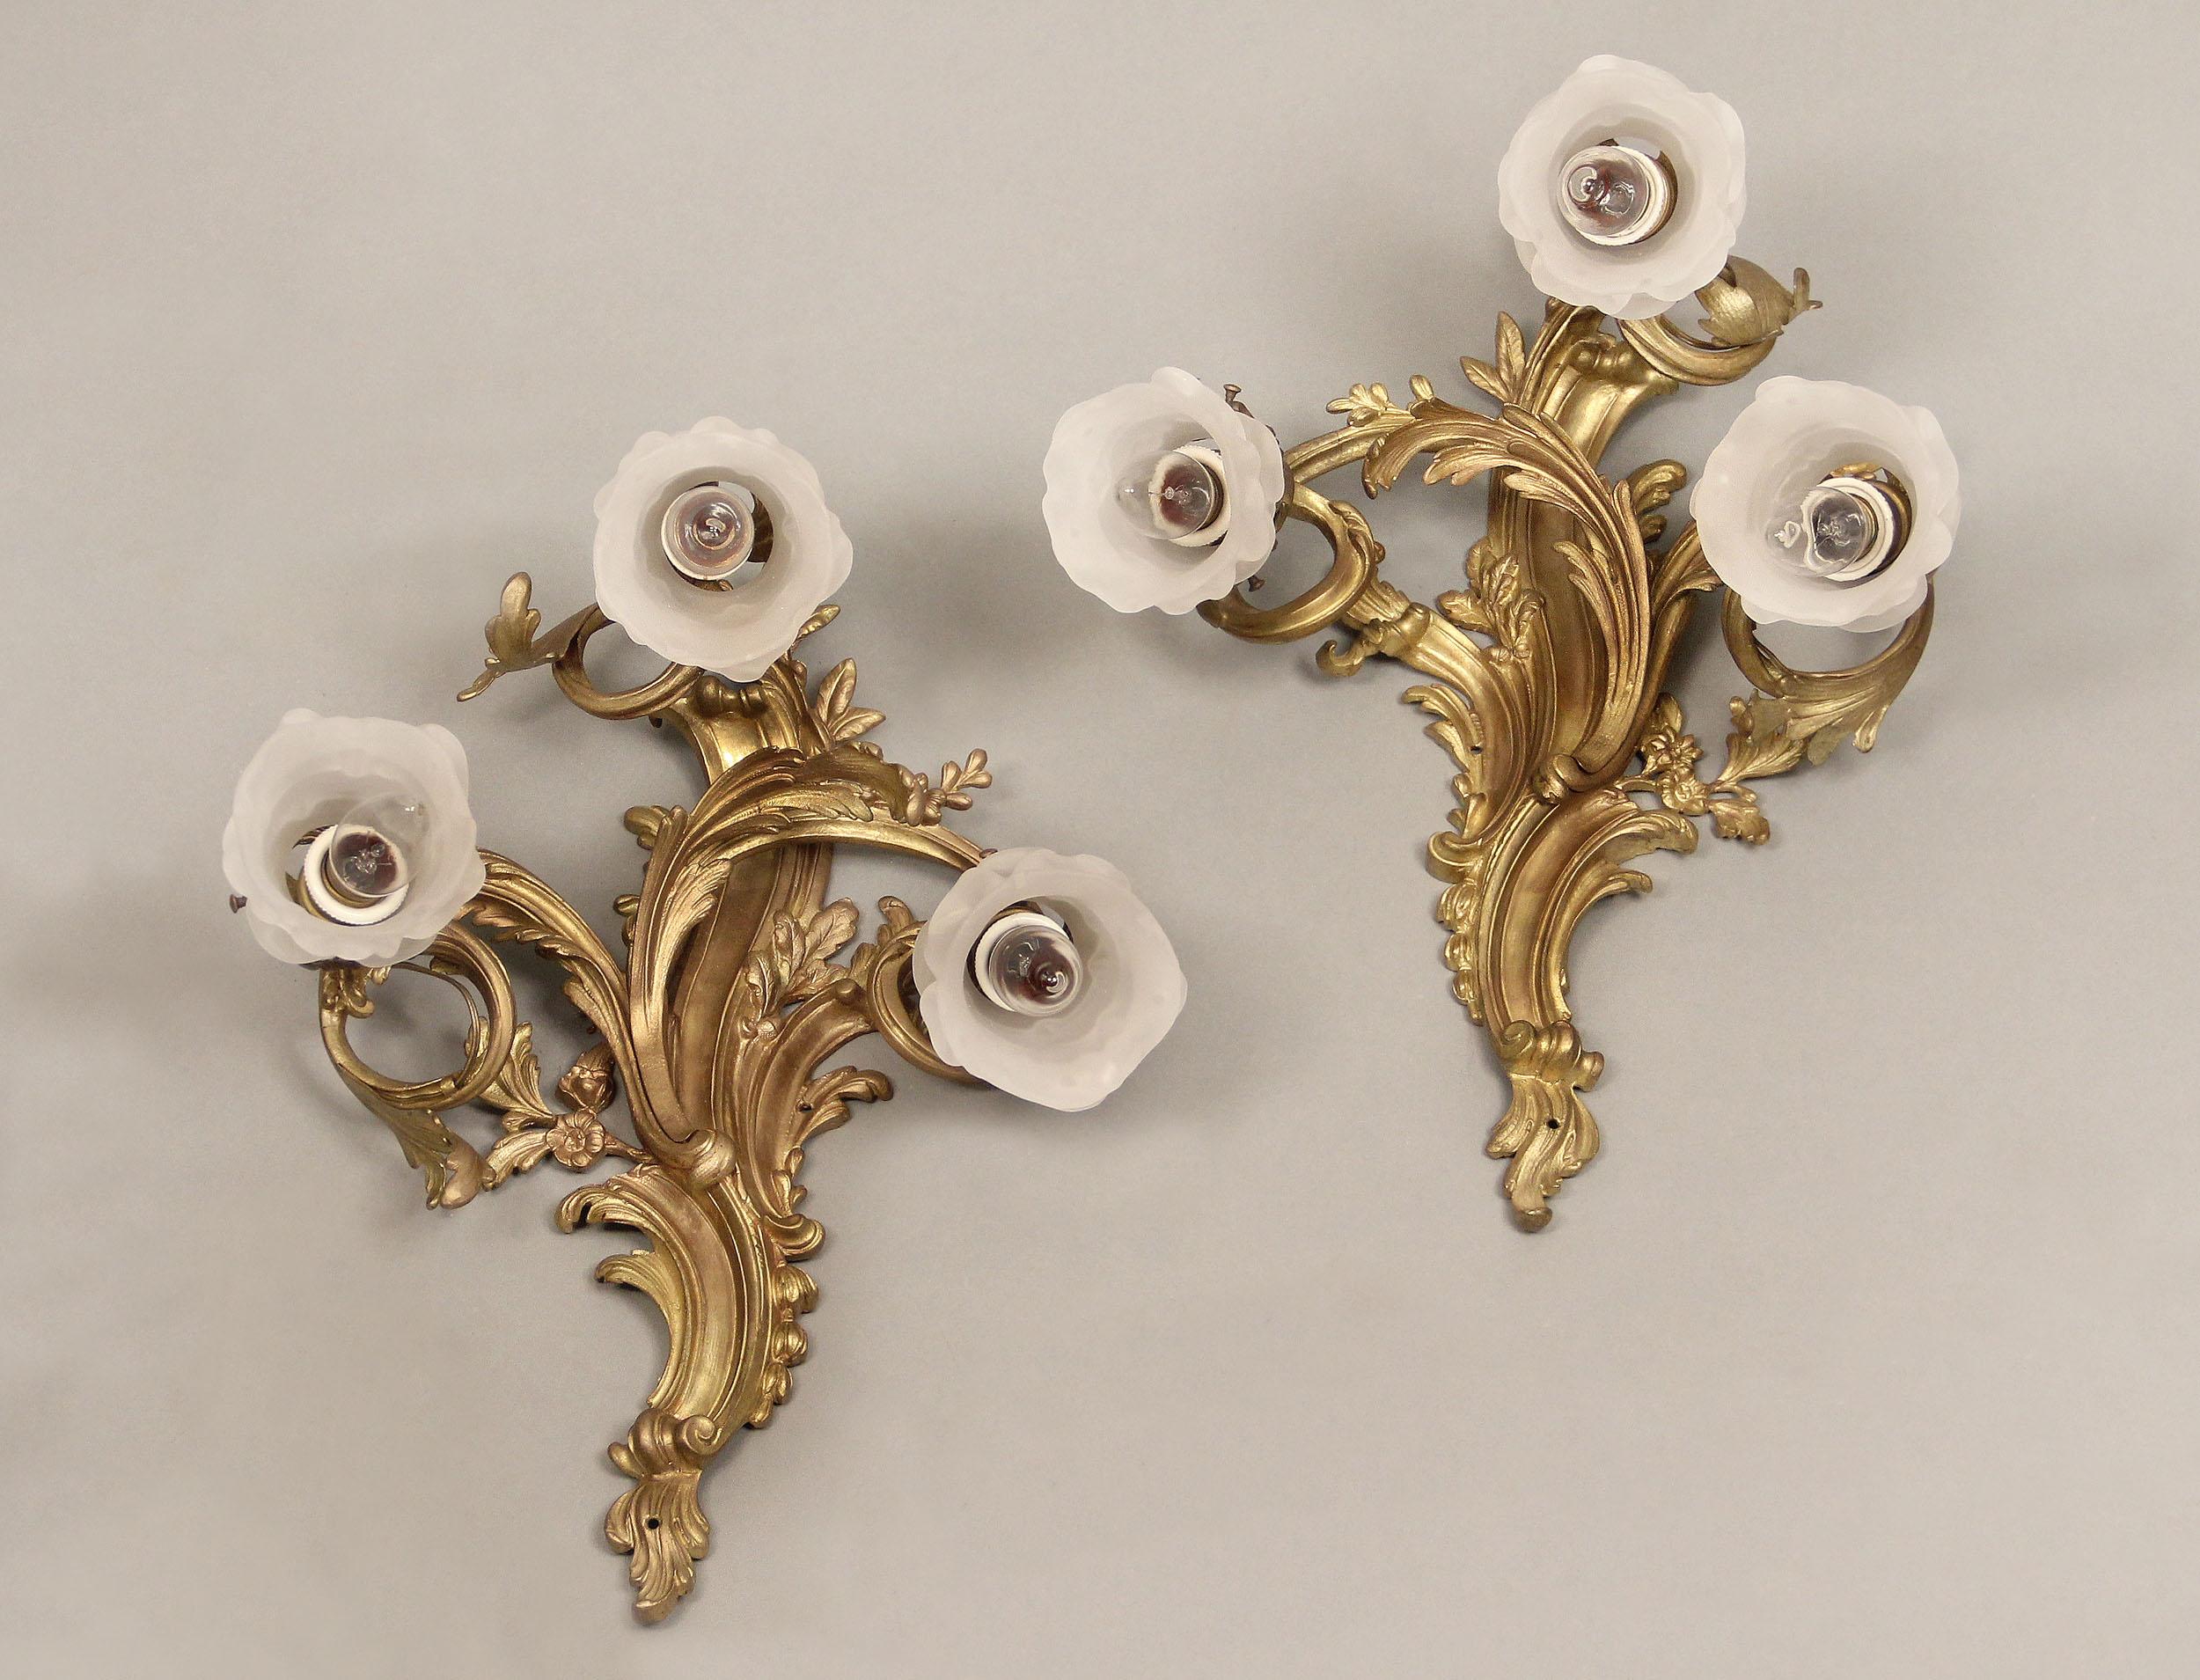 A pair of late 19th century gilt bronze three-light sconces

Rococo style sconces with the backplate and arms decorated with flowers and foliage, the lights with rose shades.